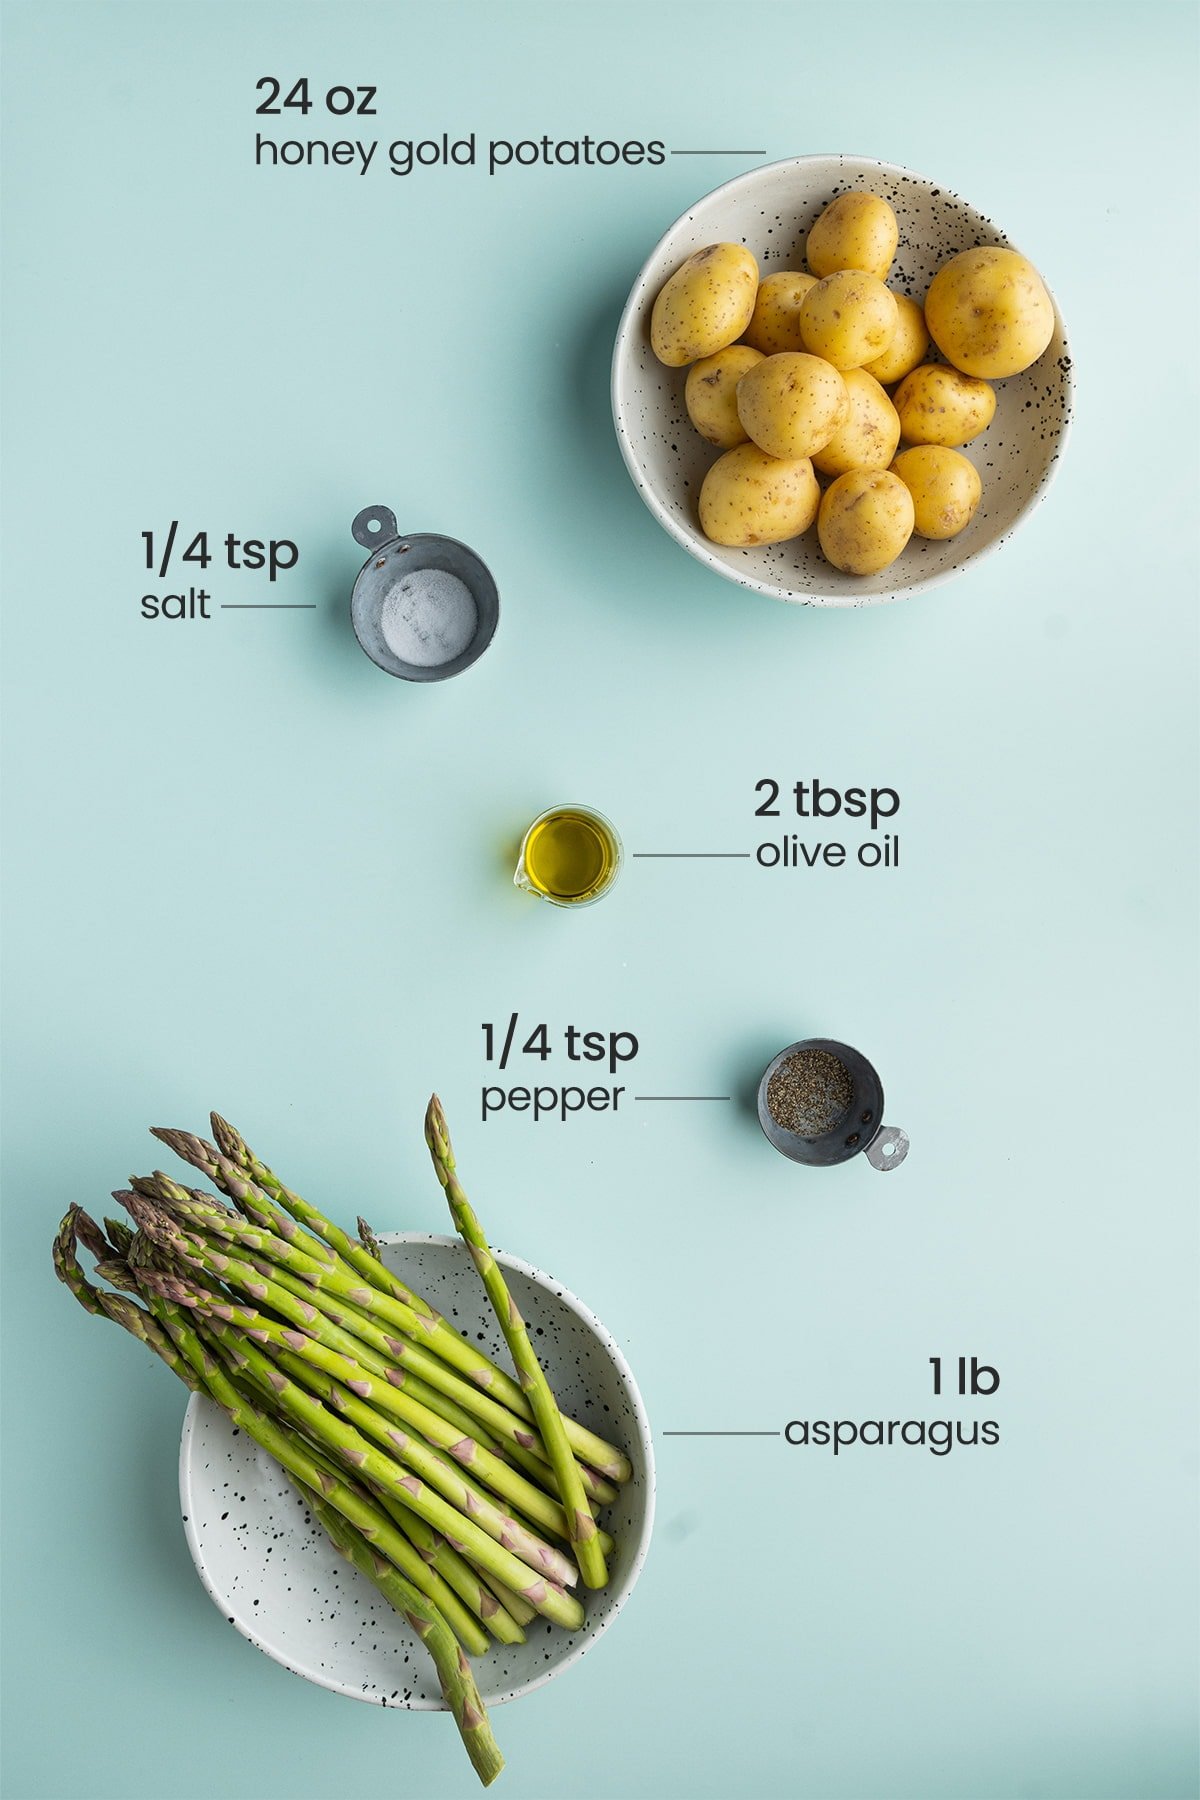 all ingredients for roasted potatoes and asparagus - honey gold potatoes, salt, olive oil, pepper, asparagus